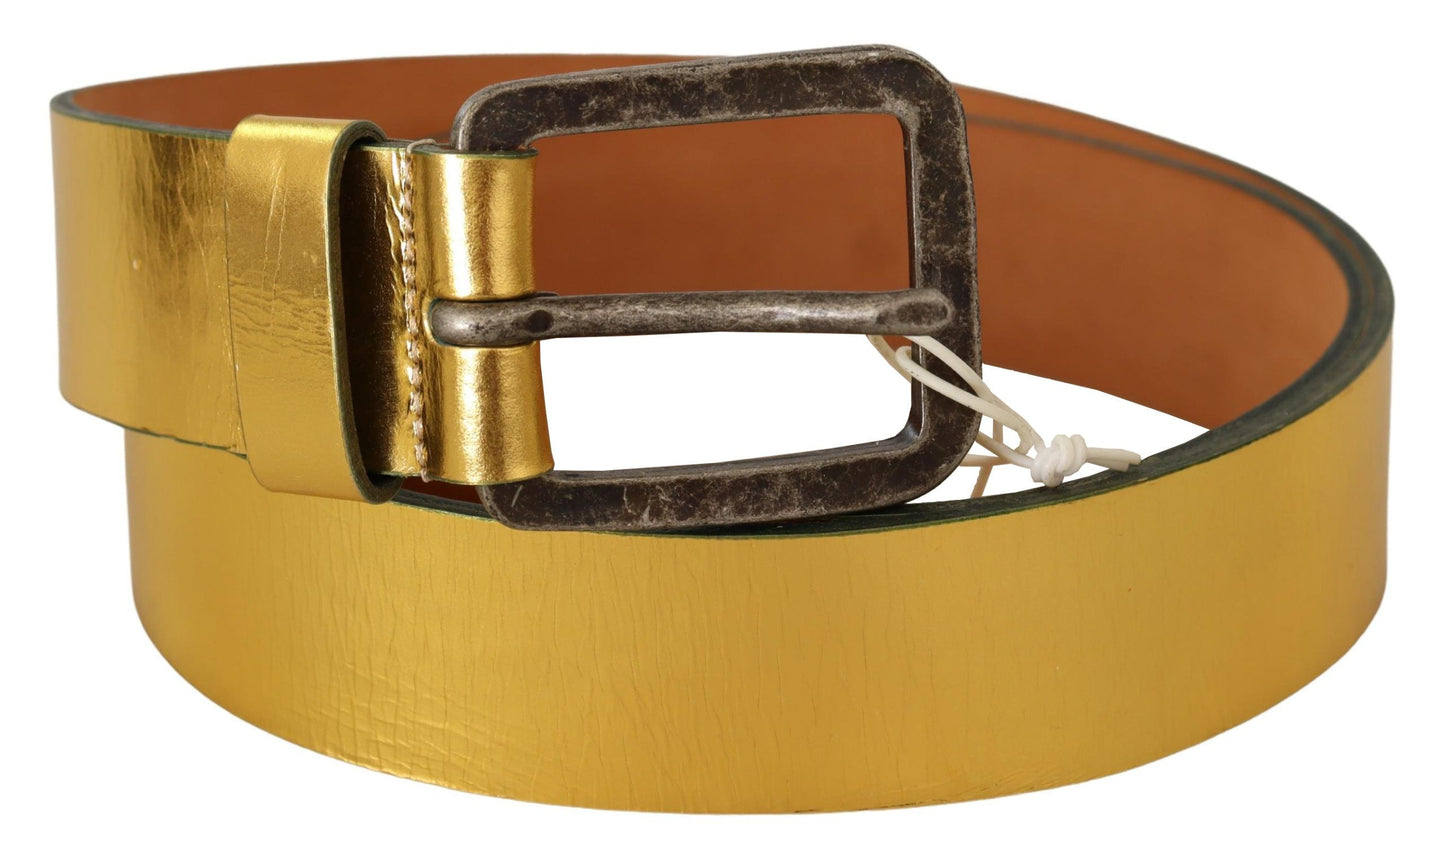 Gold Genuine Leather Rustic Silver Buckle Waist Belt - Designed by John Galliano Available to Buy at a Discounted Price on Moon Behind The Hill Online Designer Discount Store